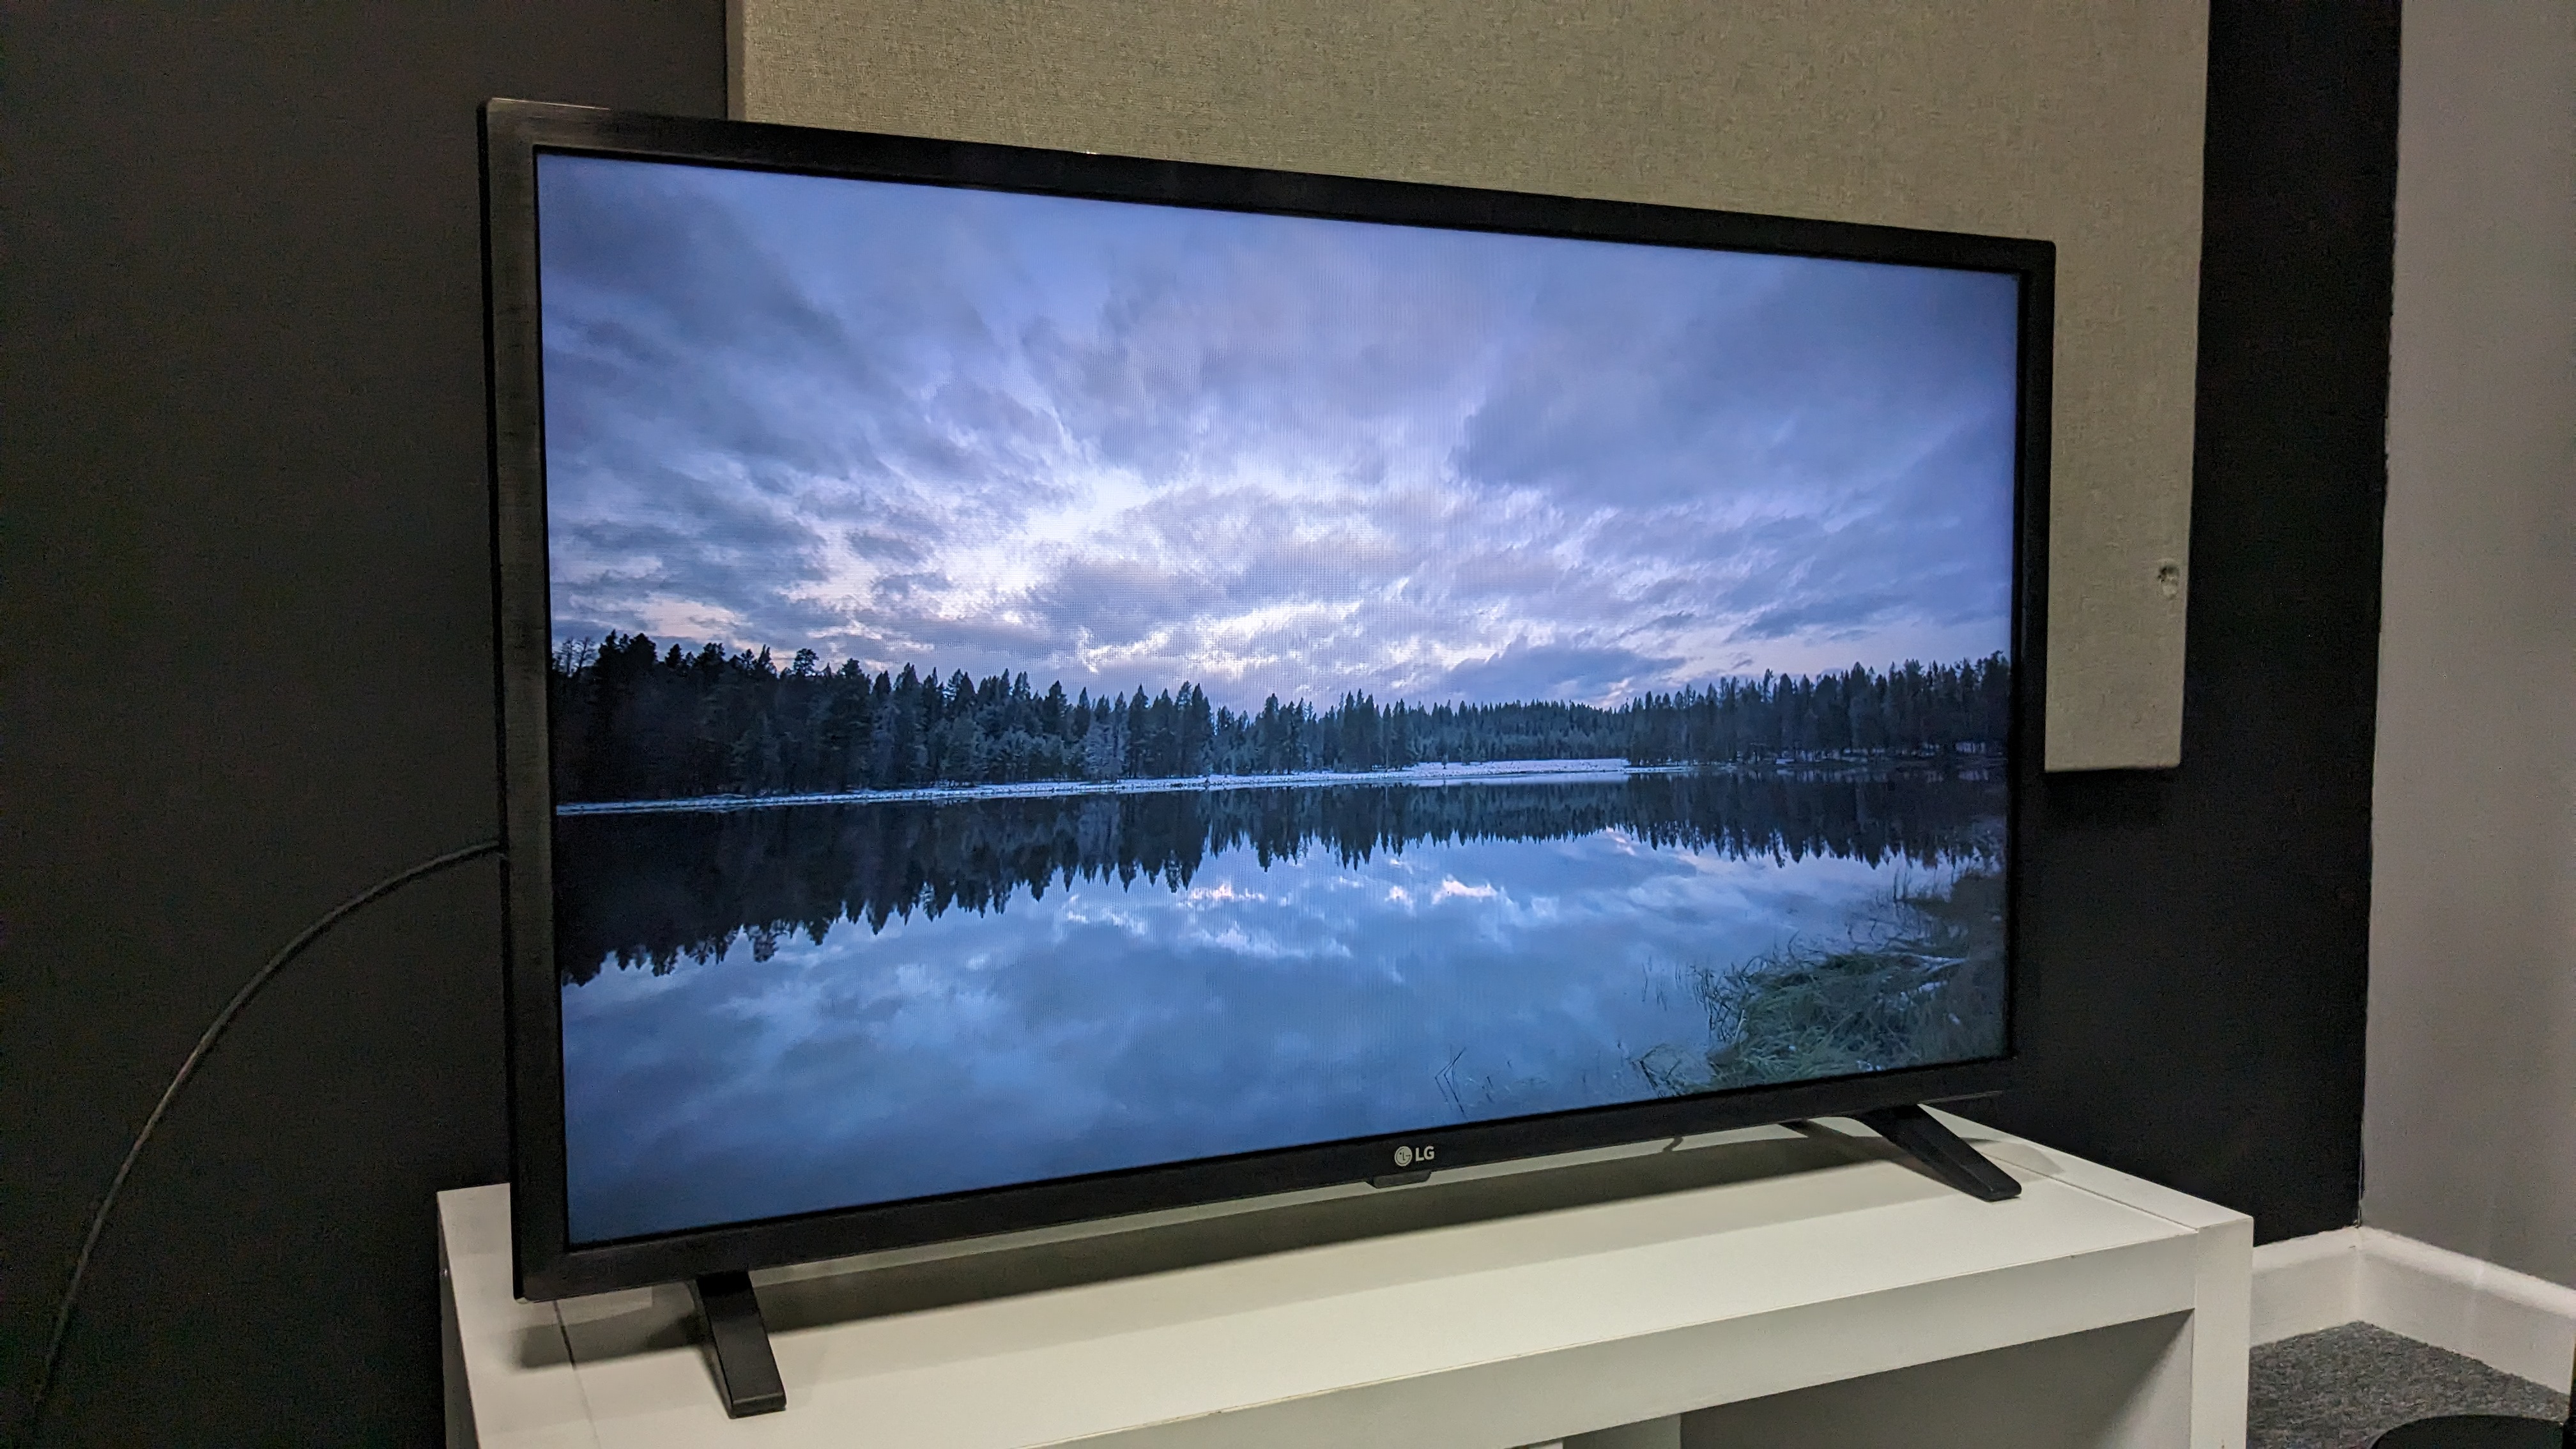 LG 32LQ6300 TV Review: Specs, Features, and Value in 2022